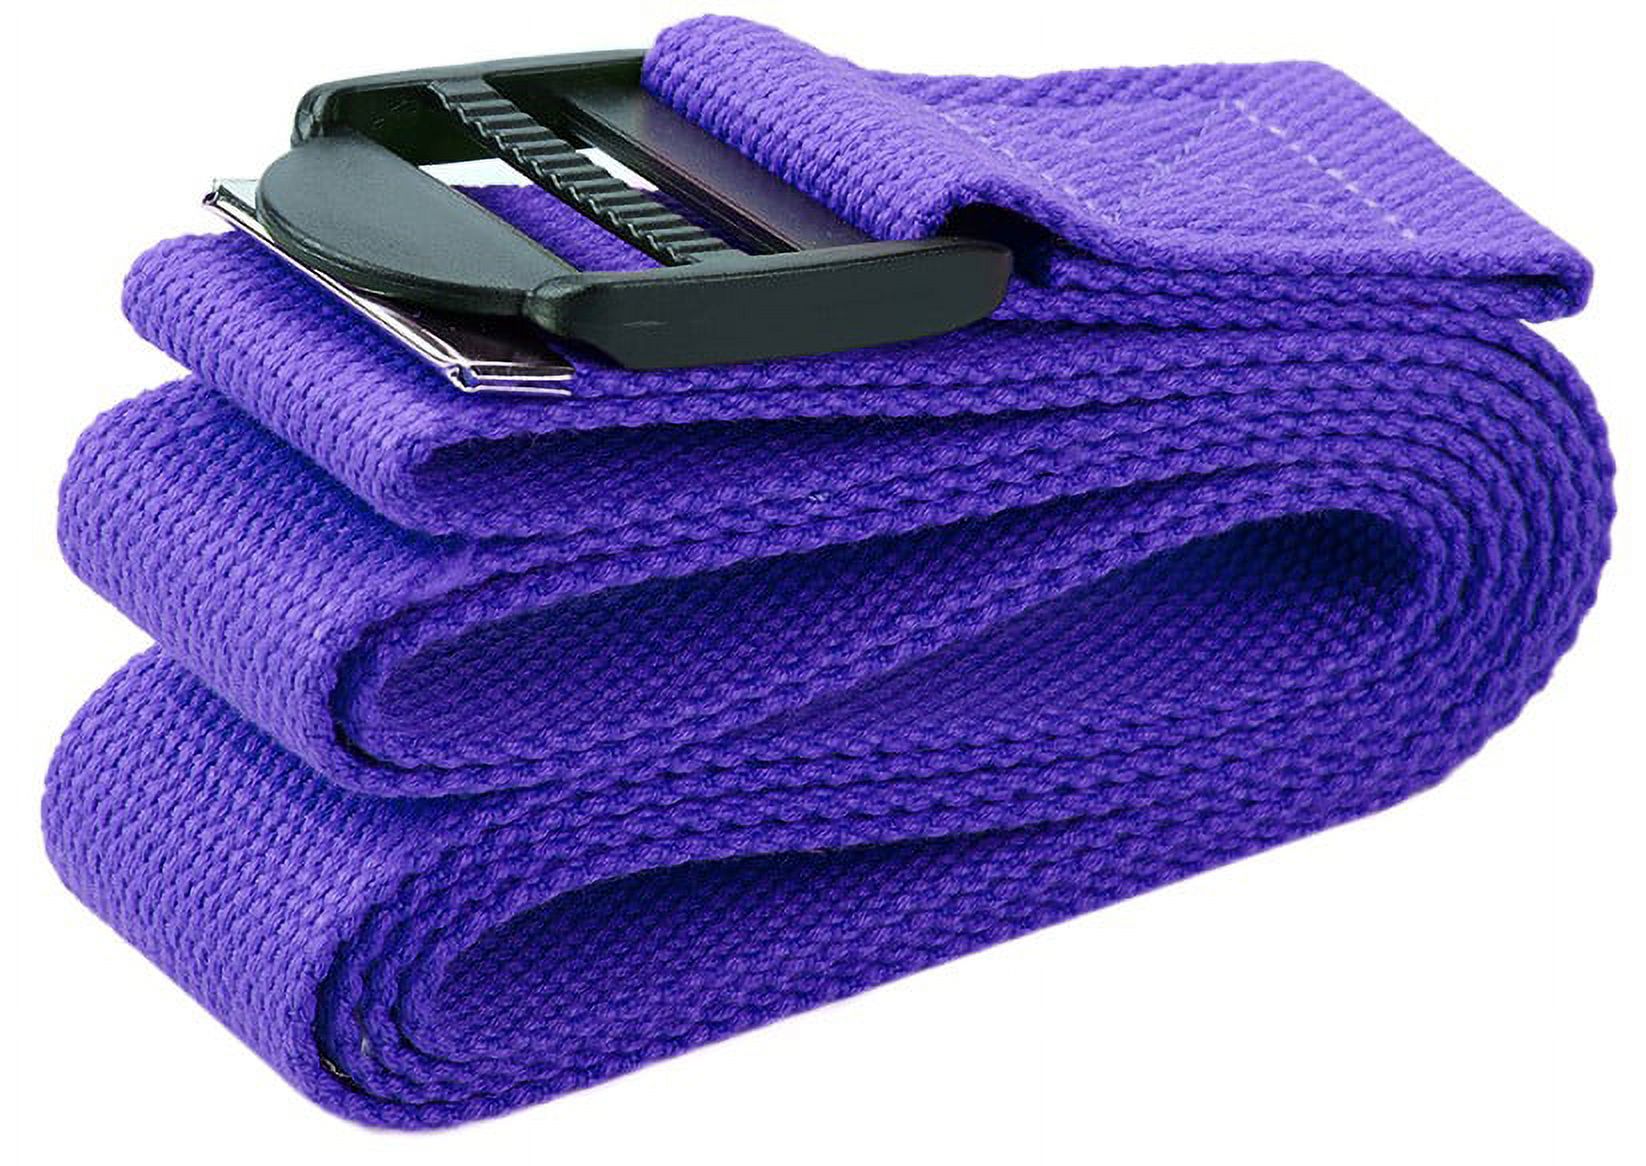 Everyday Essentials Go Yoga 7-Piece Set - Include Yoga Mat with Carrying Strap, 2 Yoga Blocks, Yoga Mat Towel, Yoga Hand Towel, Yoga Strap and Yoga Knee Pad - image 2 of 6